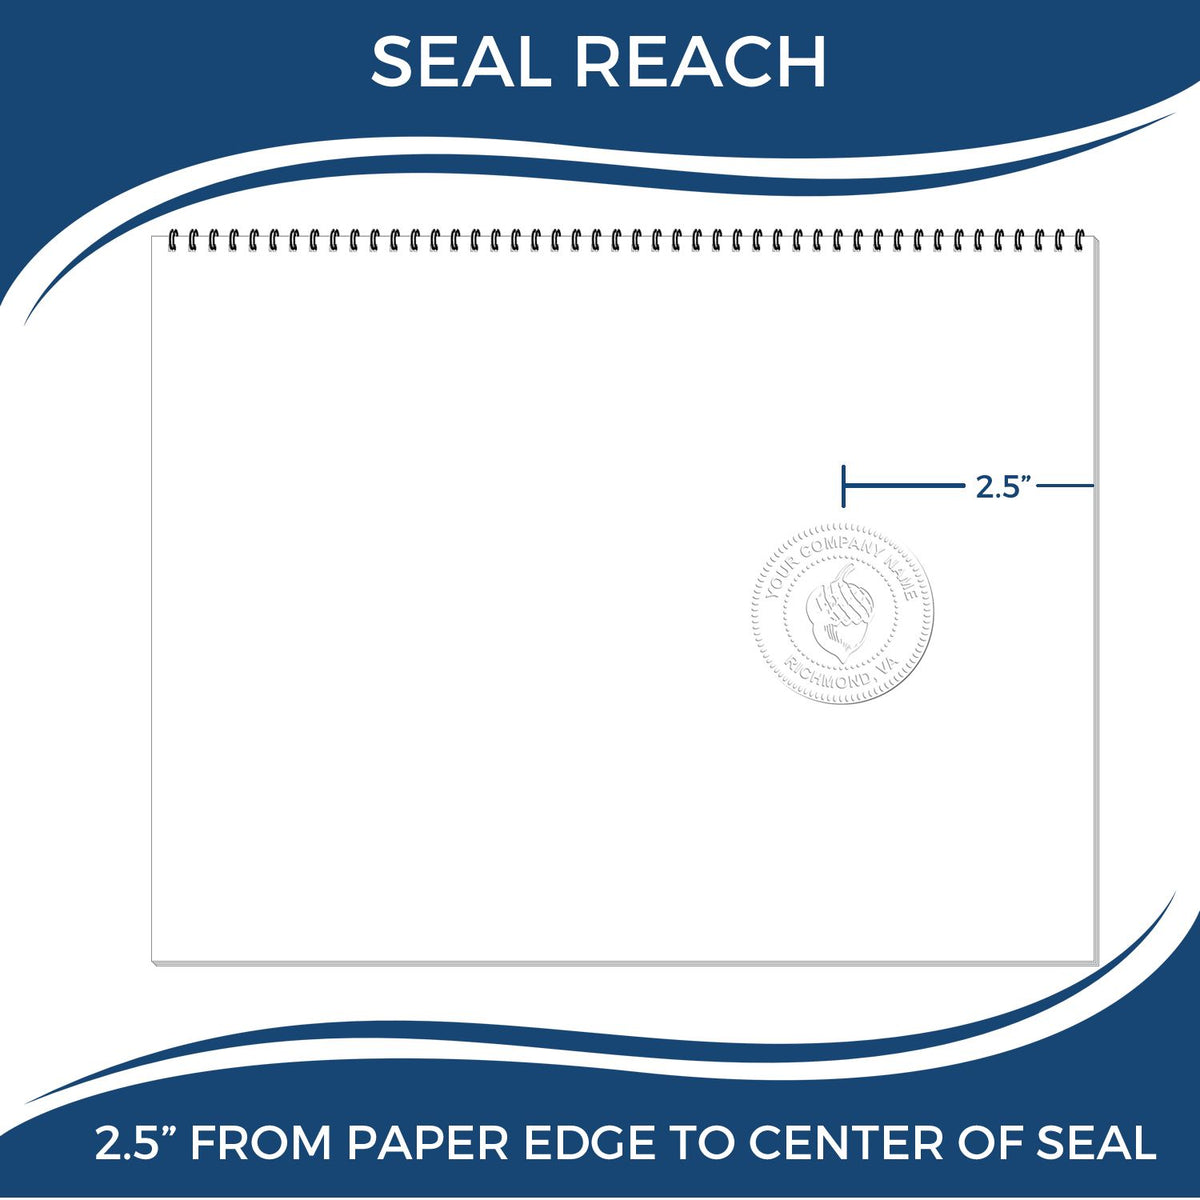 An infographic showing the seal reach which is represented by a ruler and a miniature seal image of the Heavy Duty Cast Iron South Carolina Engineer Seal Embosser